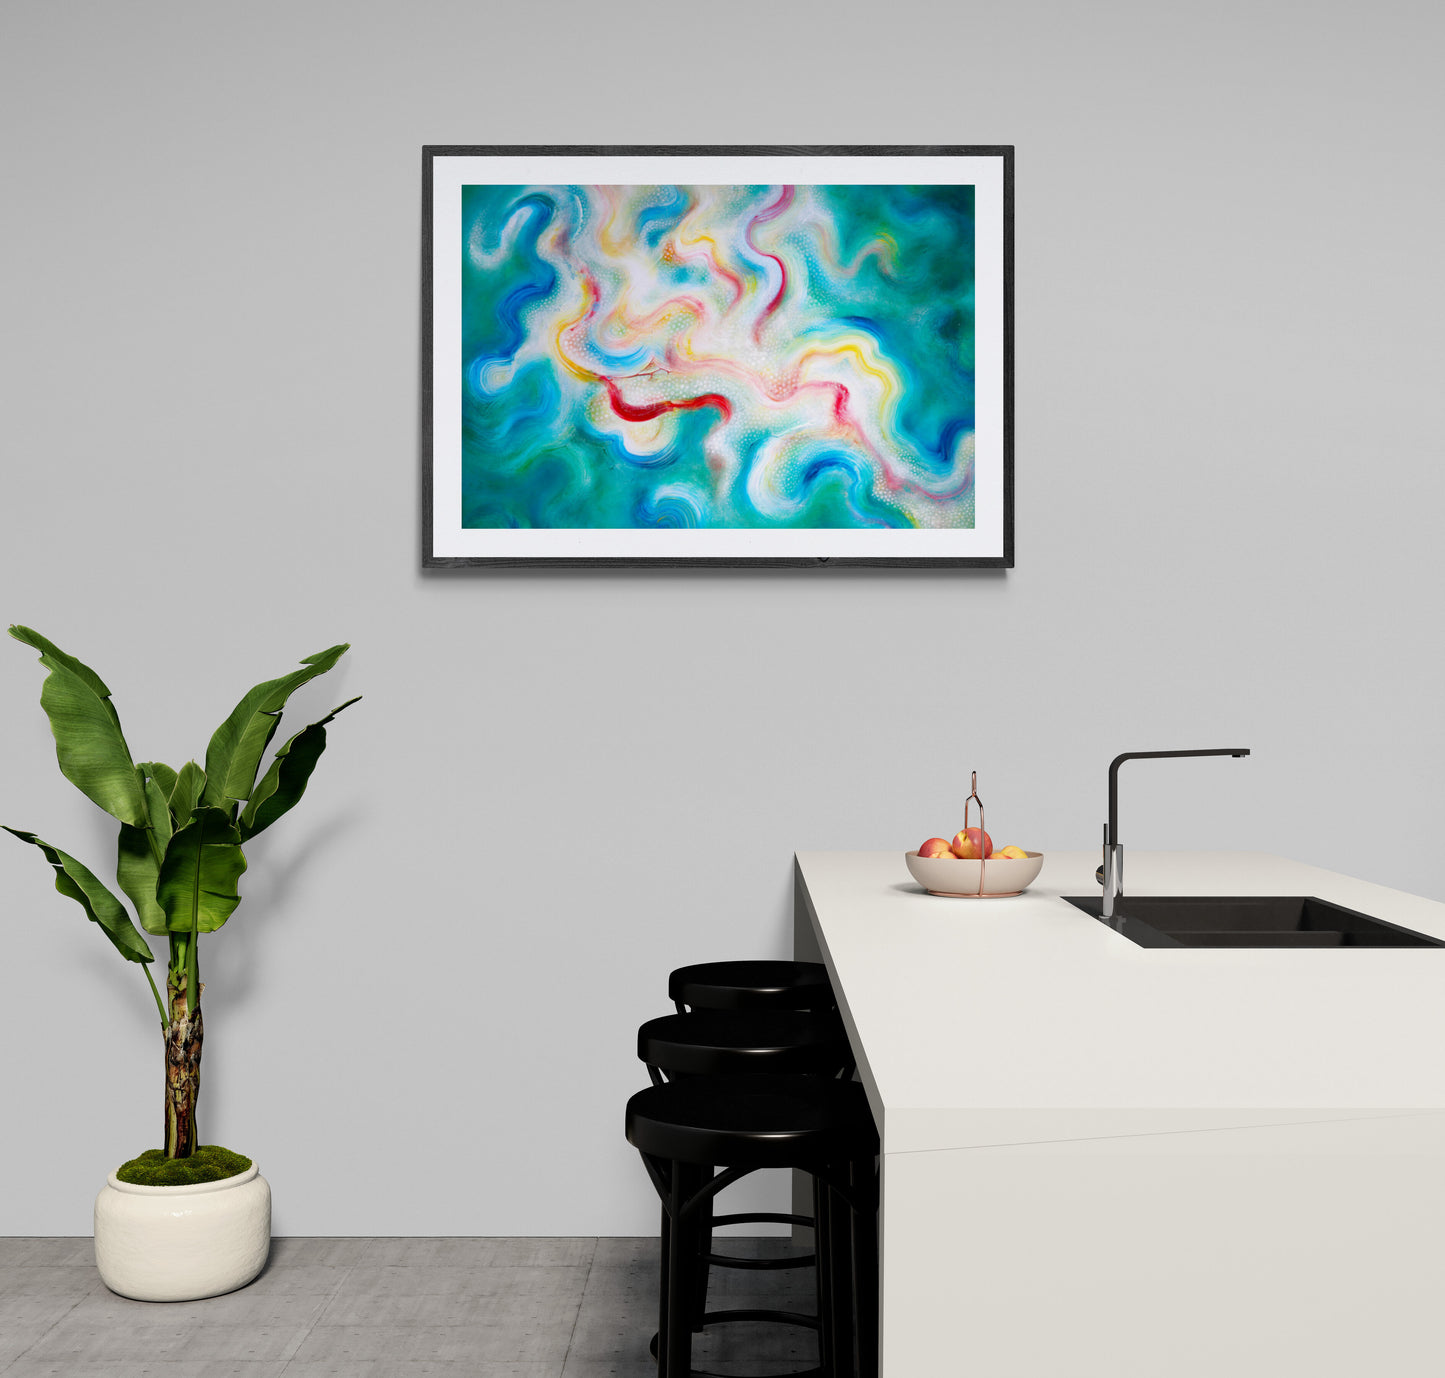 Uplifting print, colourful abstract art for the home